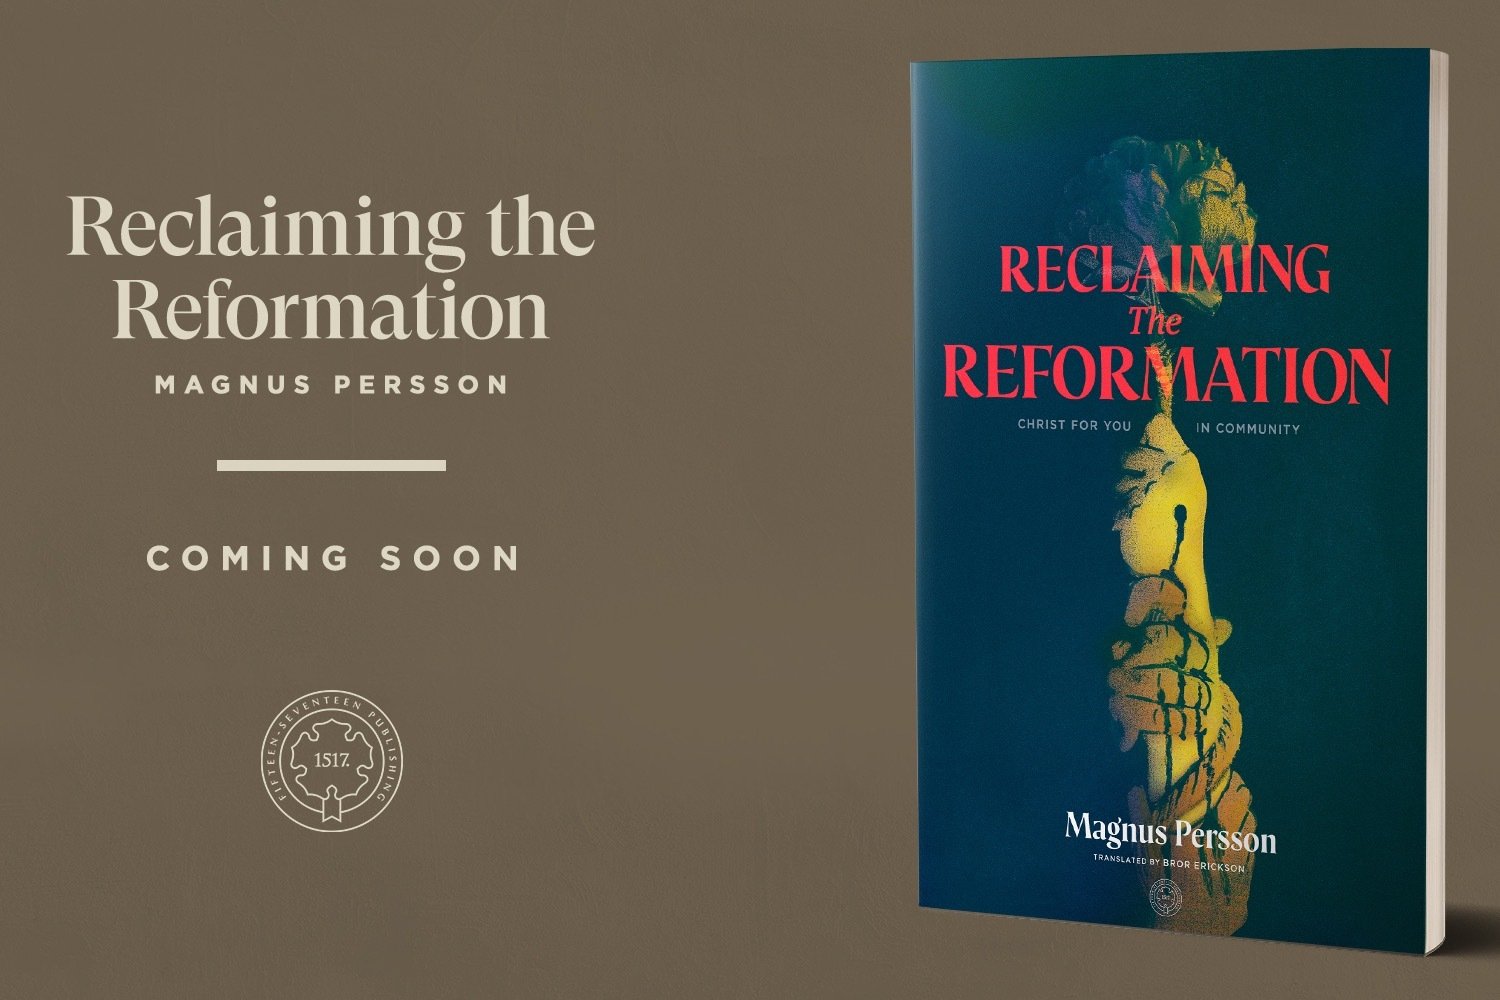 The De-formation of the Church and the Need for Re-formation